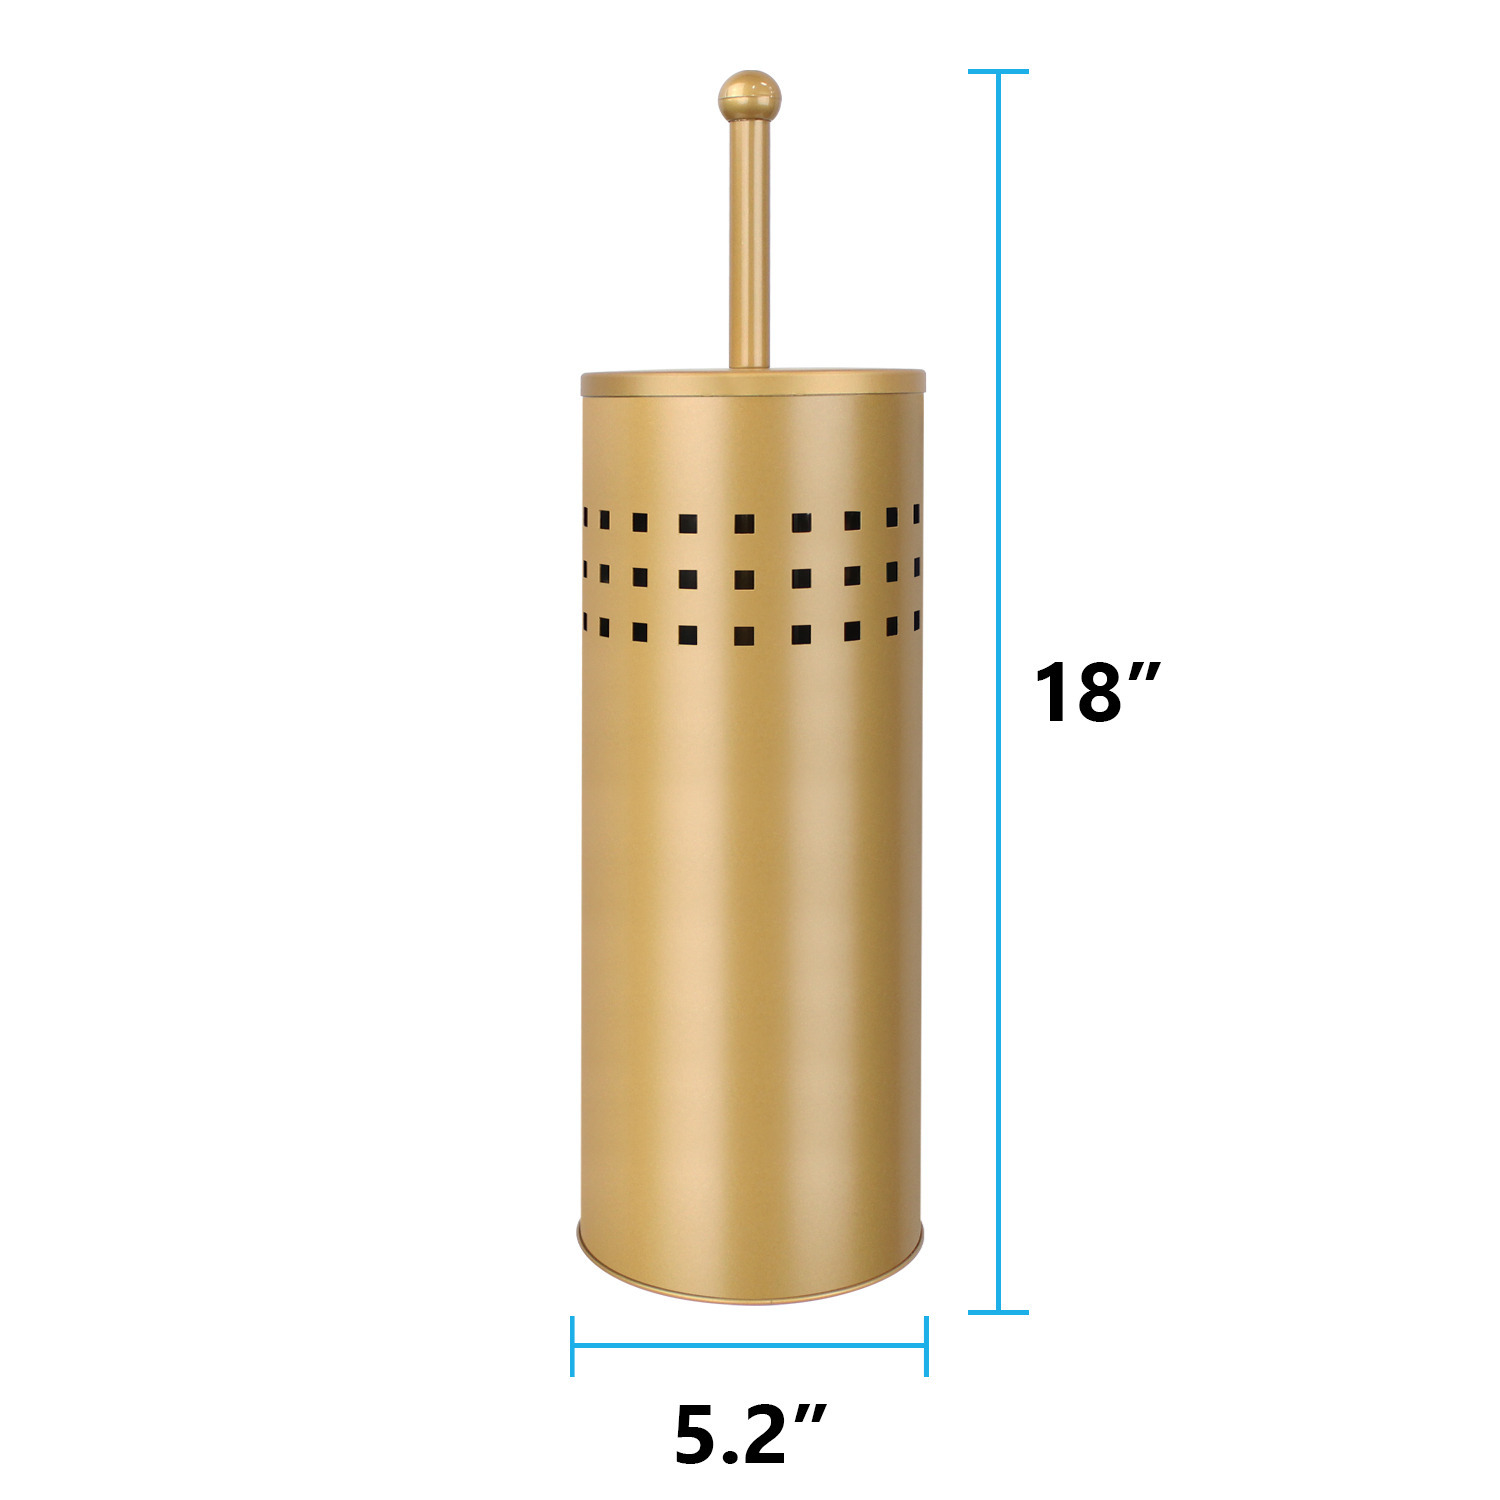 Toilet Plunger with Holder for Bathroom, Multi Drain Suitable also for Bathtubs, Quick Dry, Gold